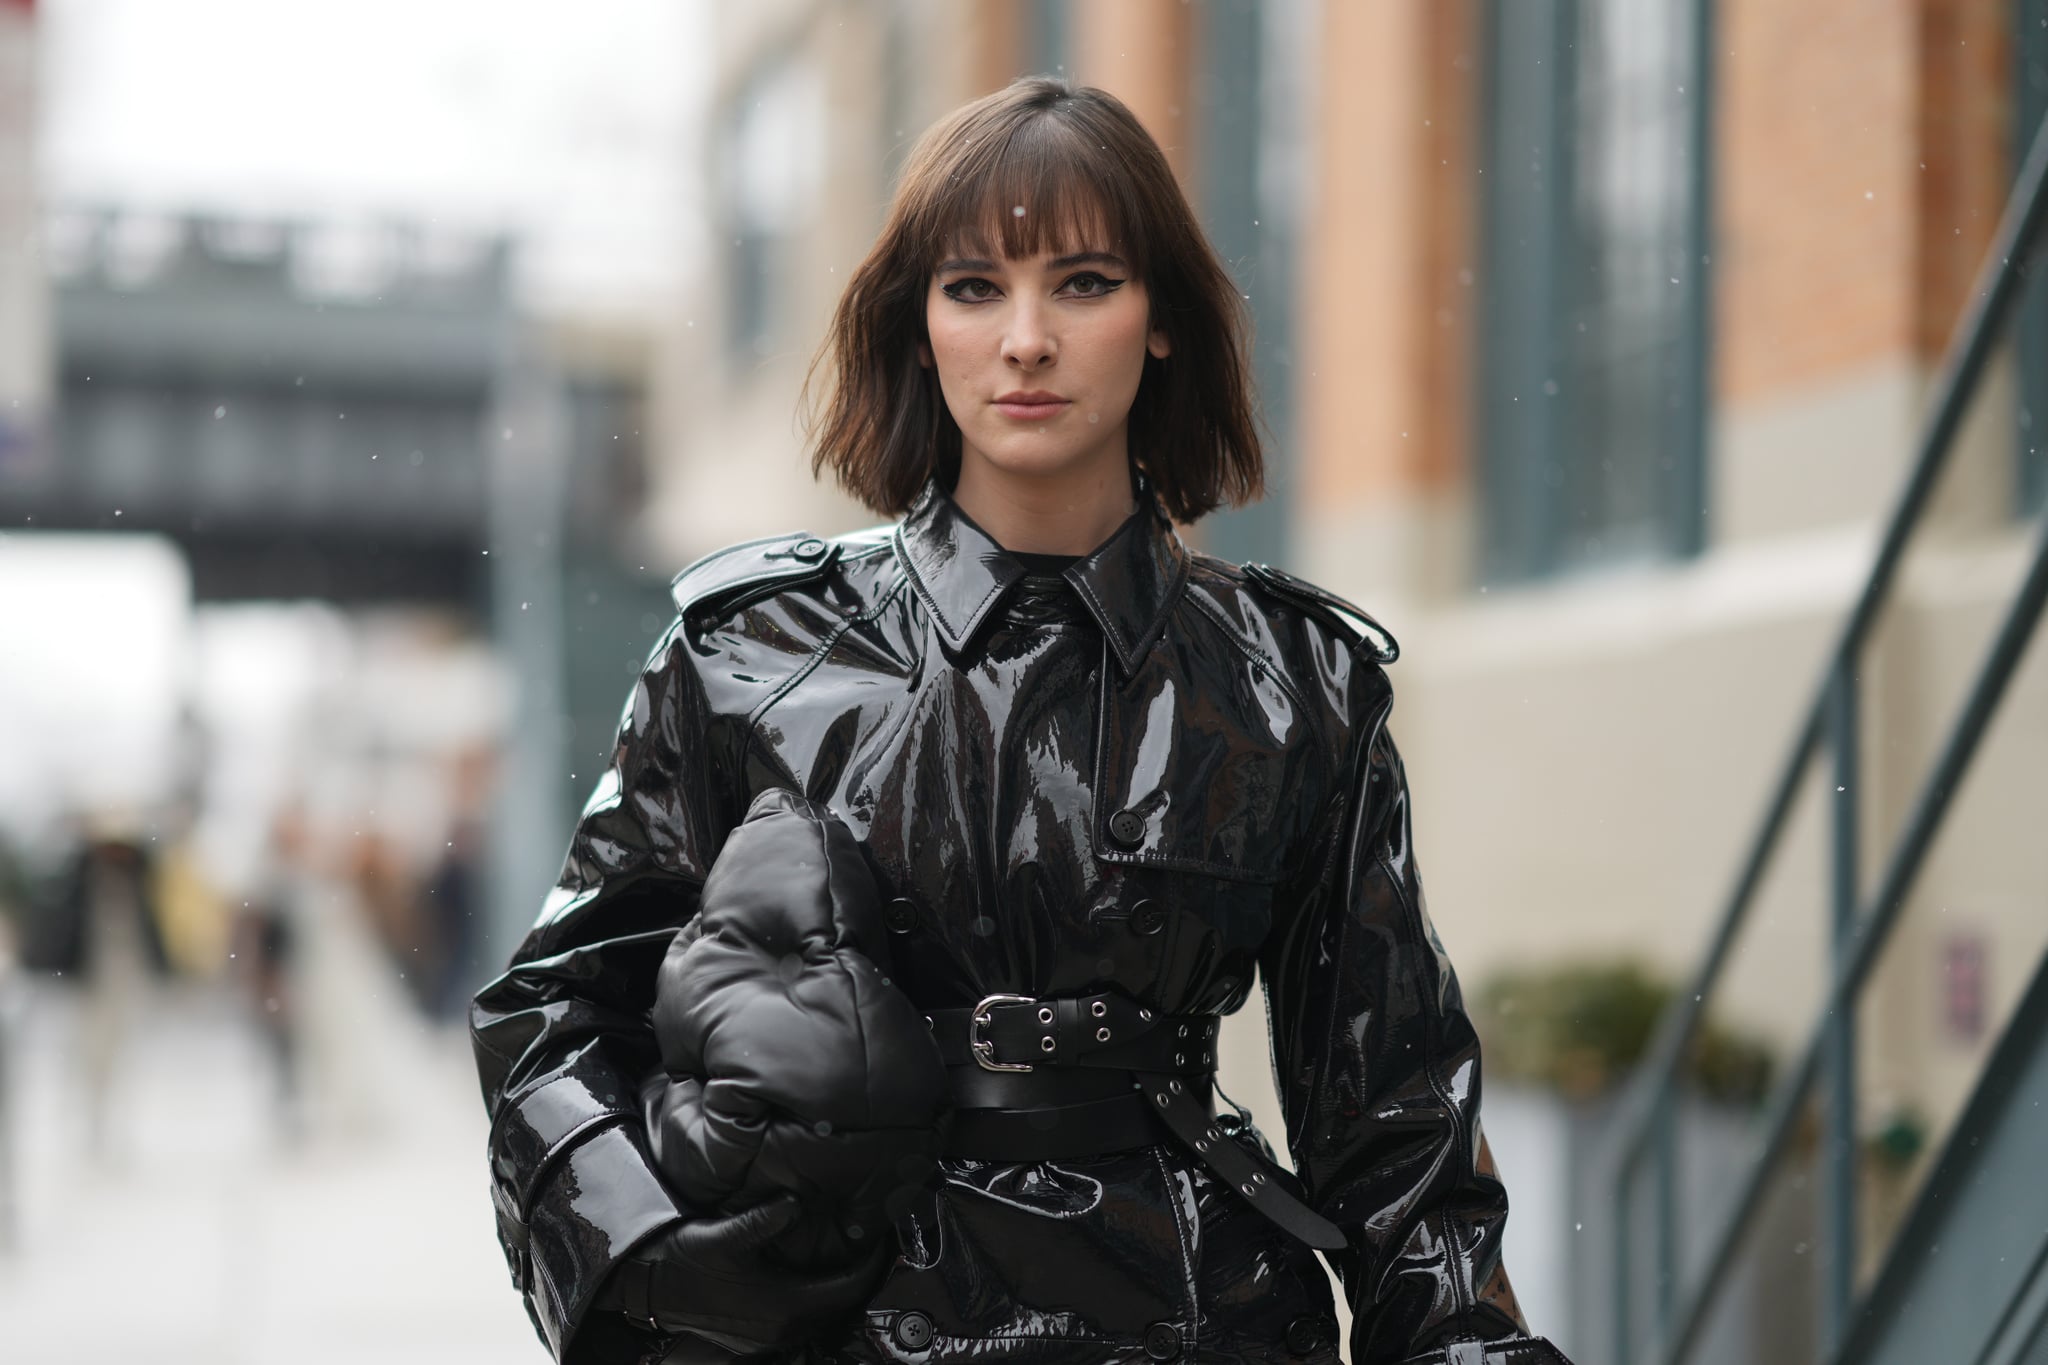 NEW YORK, NEW YORK - FEBRUARY 13: Hari Nef wears a black high neck pullover, a black shiny vinyl belted long trench coat, a black matte puffy leather handbag from Bottega Veneta, a black shiny leather nailed / studded belt, outside Khaite, during New York Fashion Week, on February 13, 2022 in New York City. (Photo by Edward Berthelot/Getty Images)